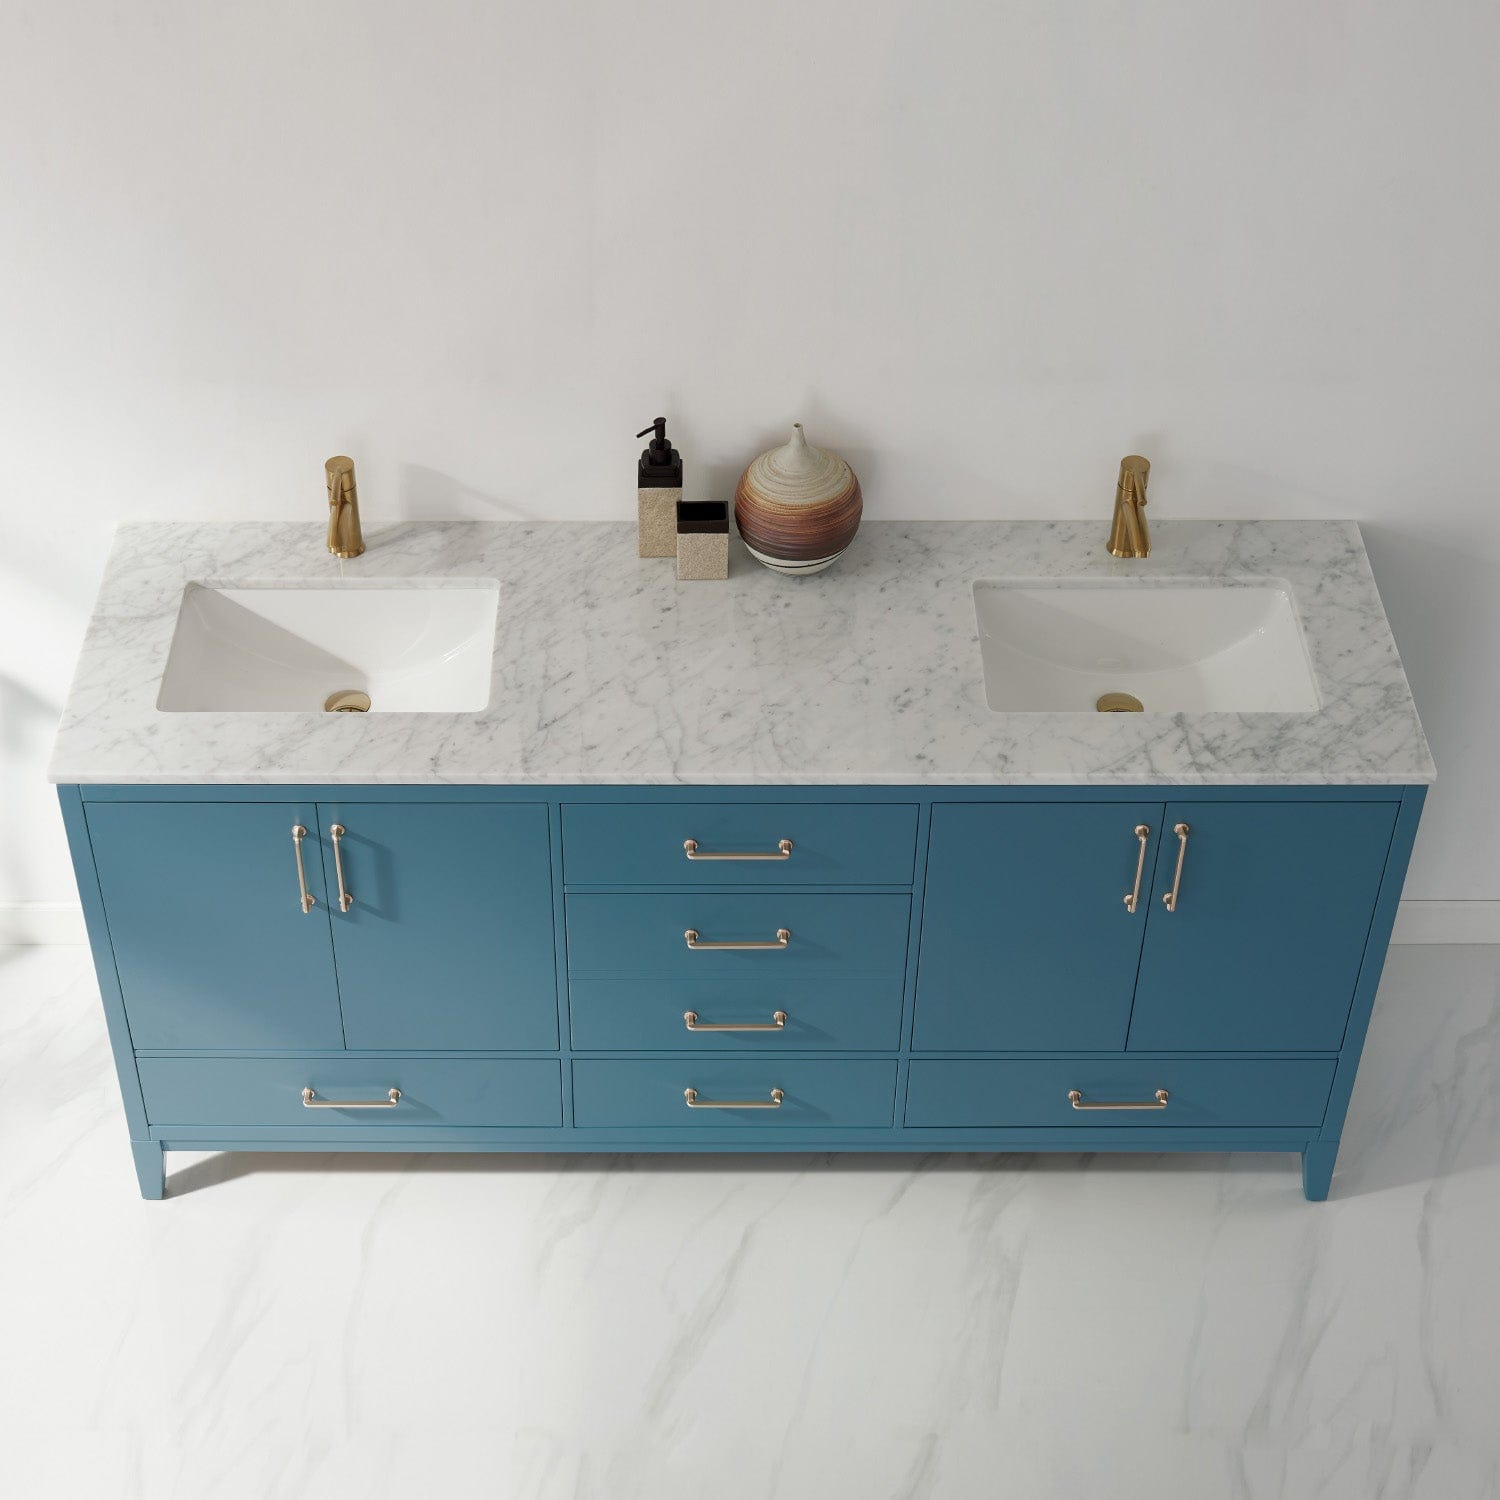 Altair Sutton 72" Double Bathroom Vanity Set in Royal Green and Carrara White Marble Countertop without Mirror 541072-RG-CA-NM - Molaix631112972024Vanity541072-RG-CA-NM